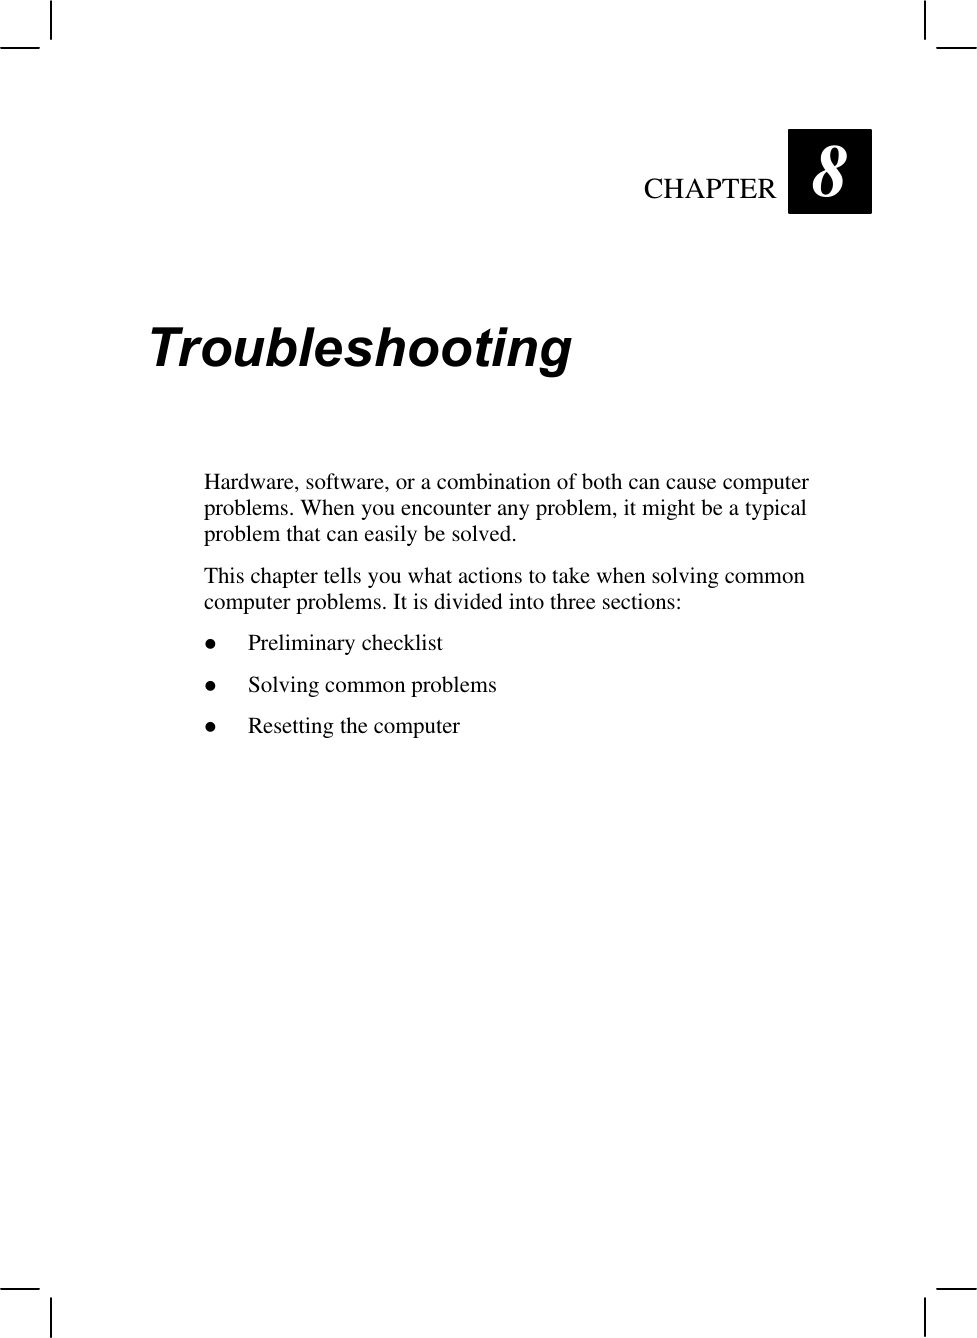 CHAPTER  8TroubleshootingHardware, software, or a combination of both can cause computerproblems. When you encounter any problem, it might be a typicalproblem that can easily be solved.This chapter tells you what actions to take when solving commoncomputer problems. It is divided into three sections:l Preliminary checklistl Solving common problemsl Resetting the computer